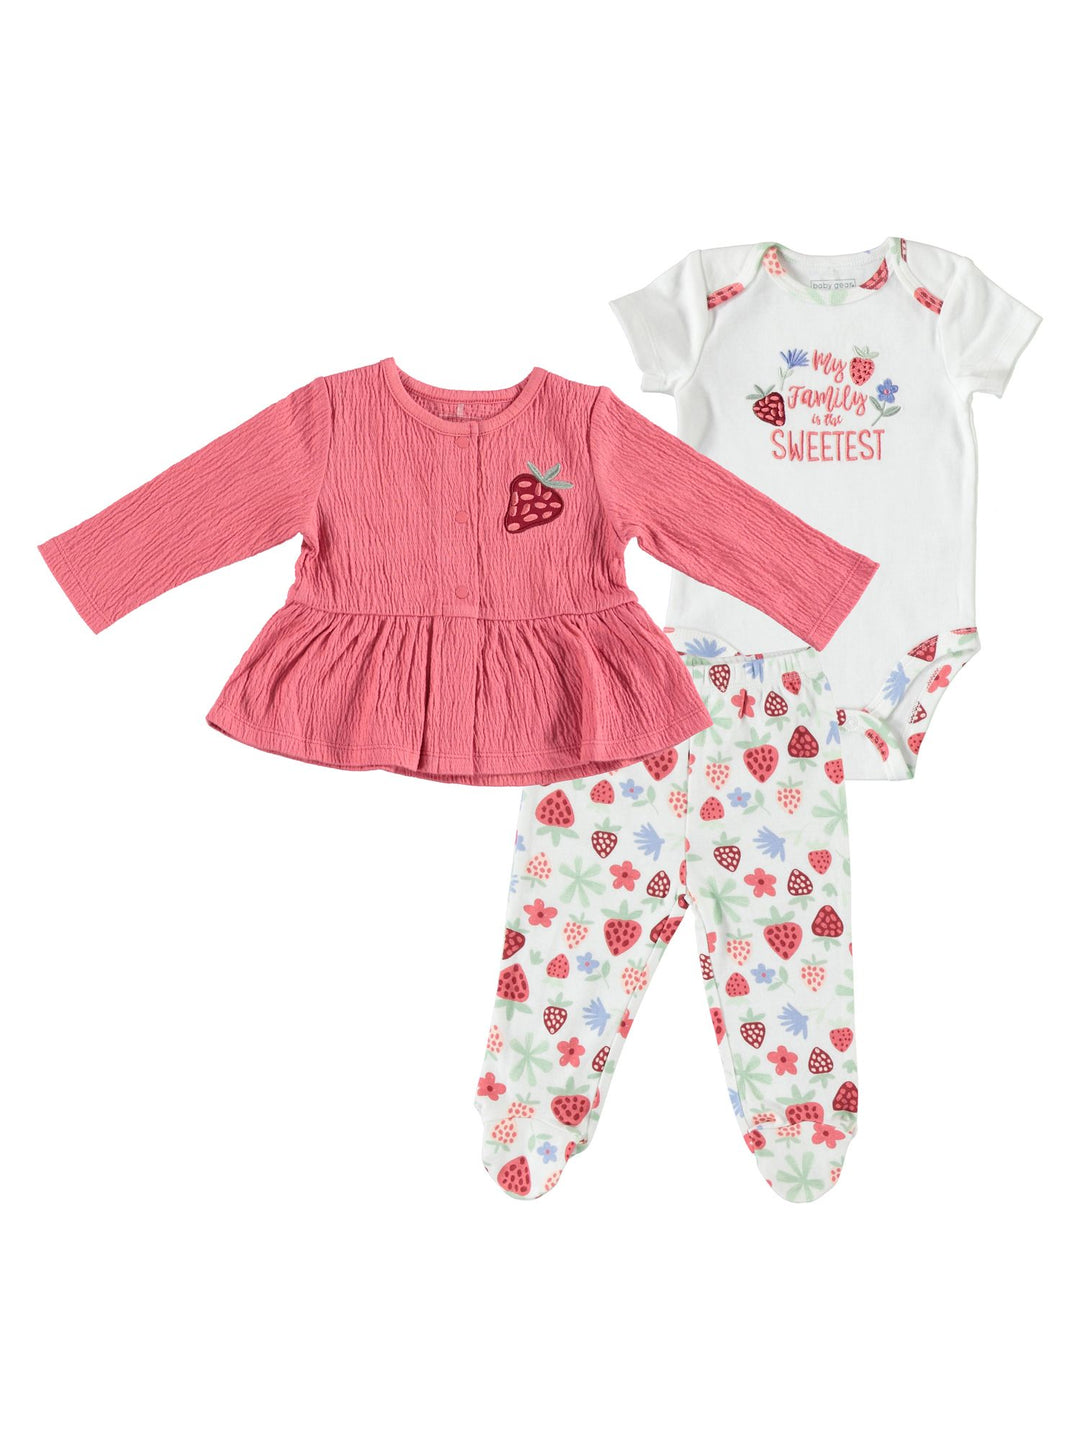 Baby Girl 3 Piece Cardigan Set Strawberry Print Onesie, Pant and Muslin Red Jacket For Newborn Size 0-3M